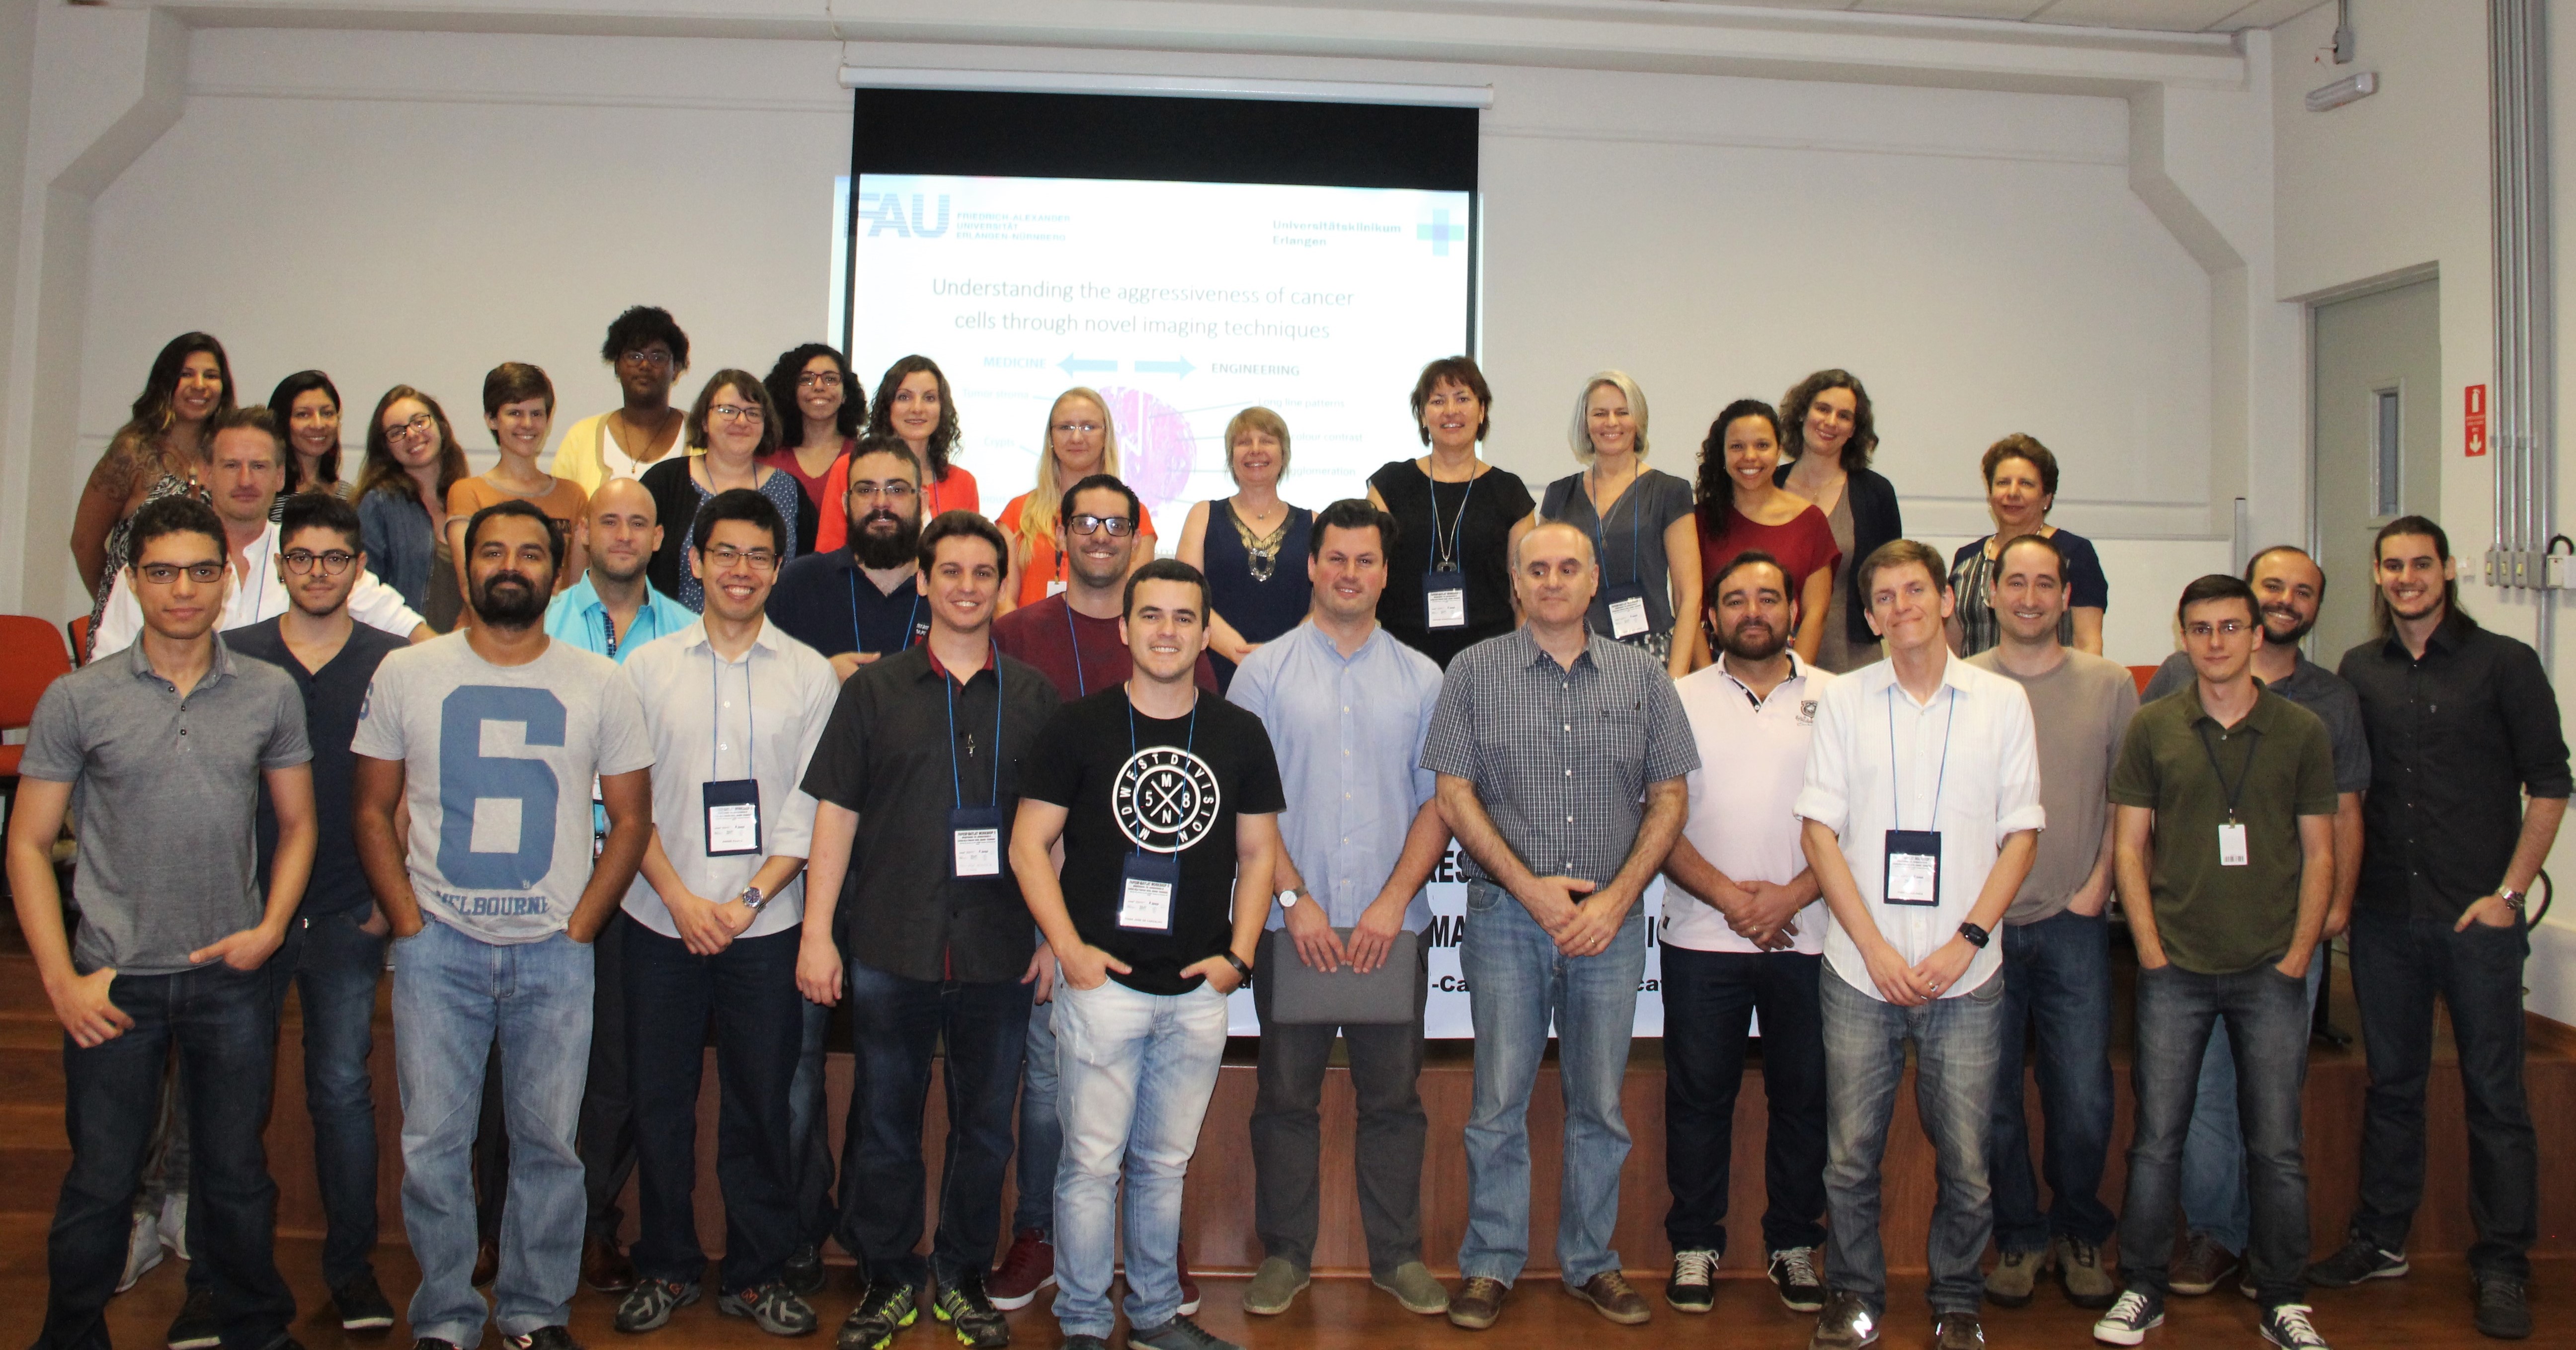 Around 35 researchers took part in the workshop